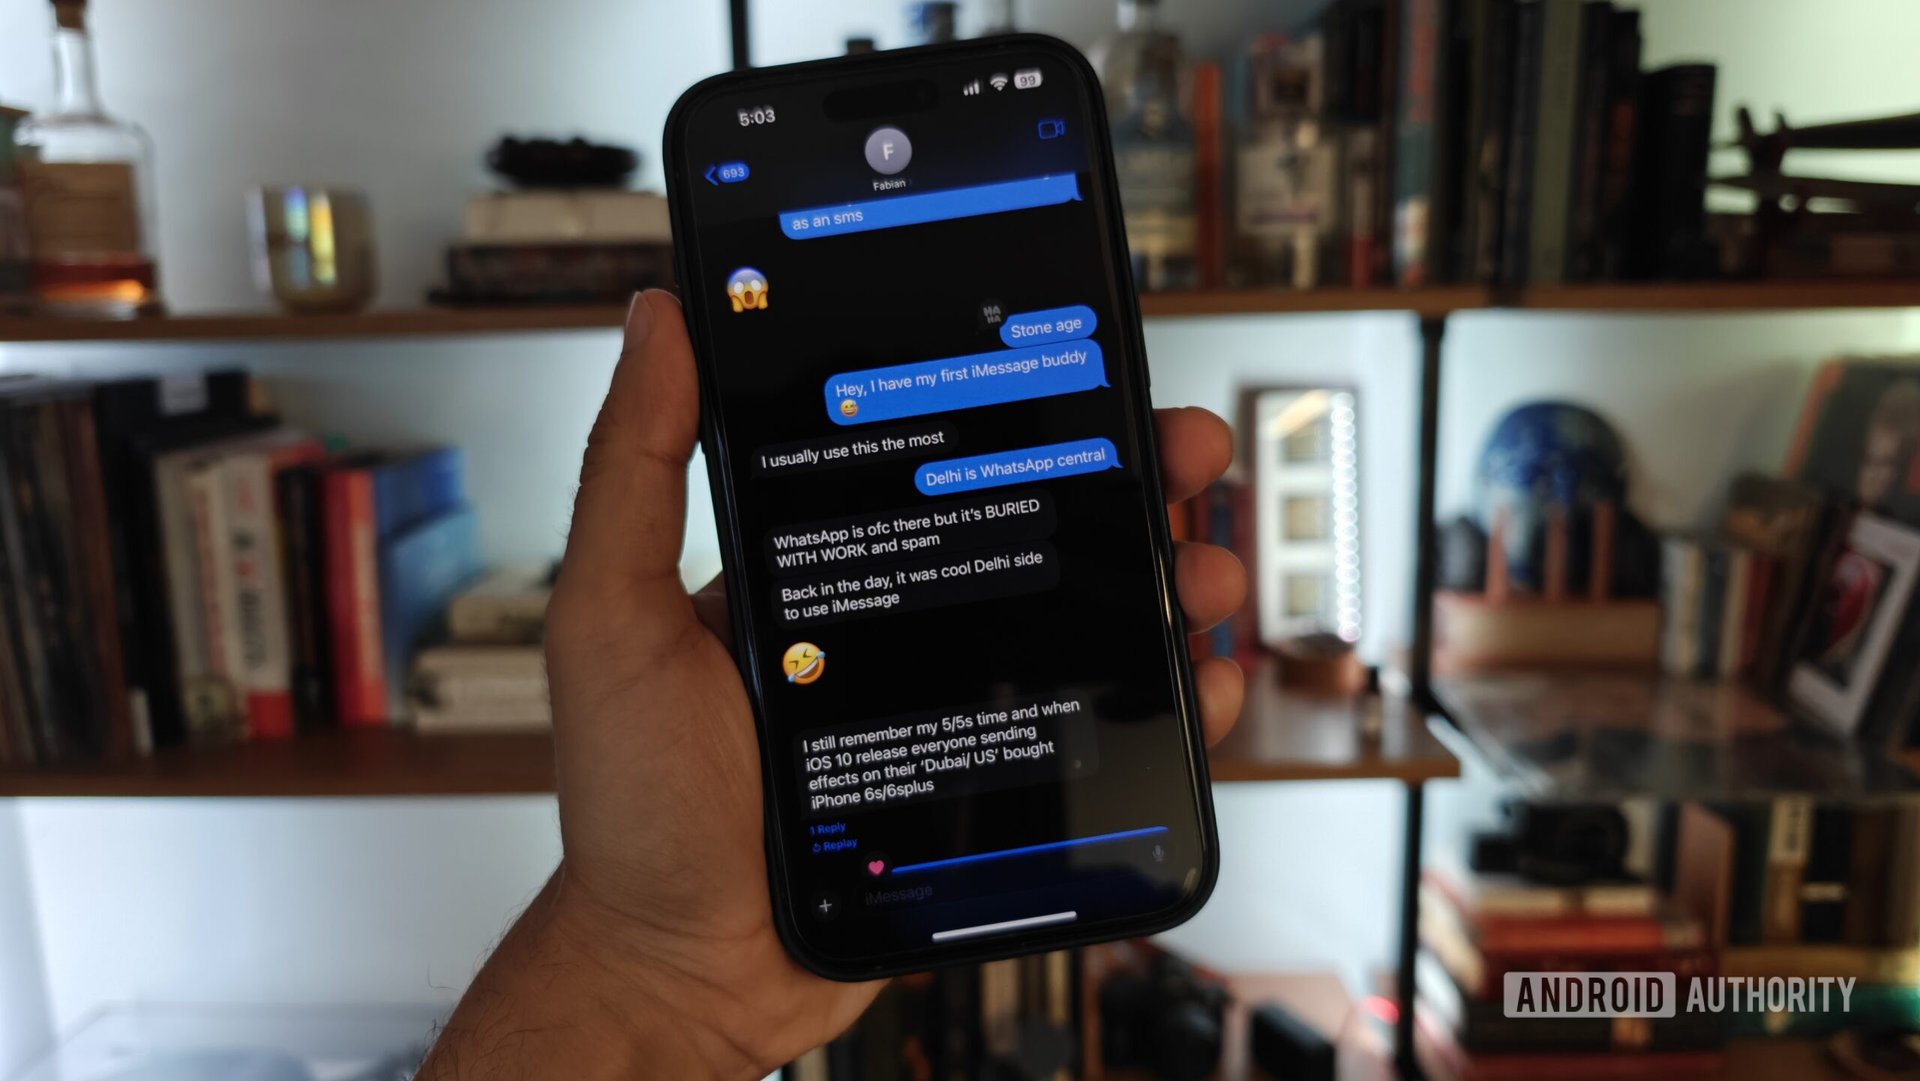 iMessage on an Android phone scaled